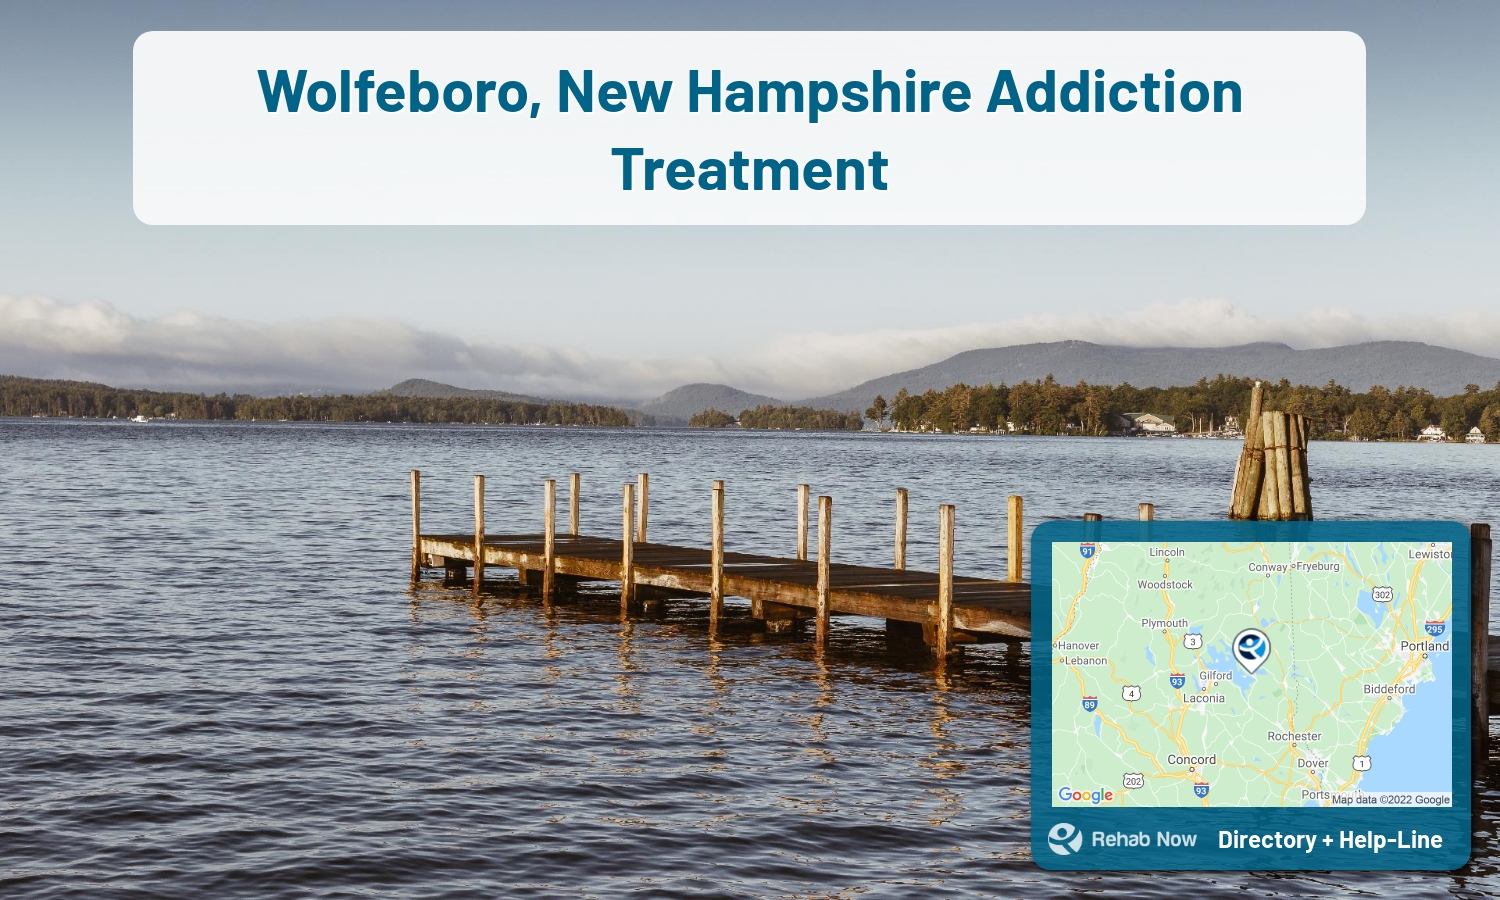 View options, availability, treatment methods, and more, for drug rehab and alcohol treatment in Wolfeboro, New Hampshire